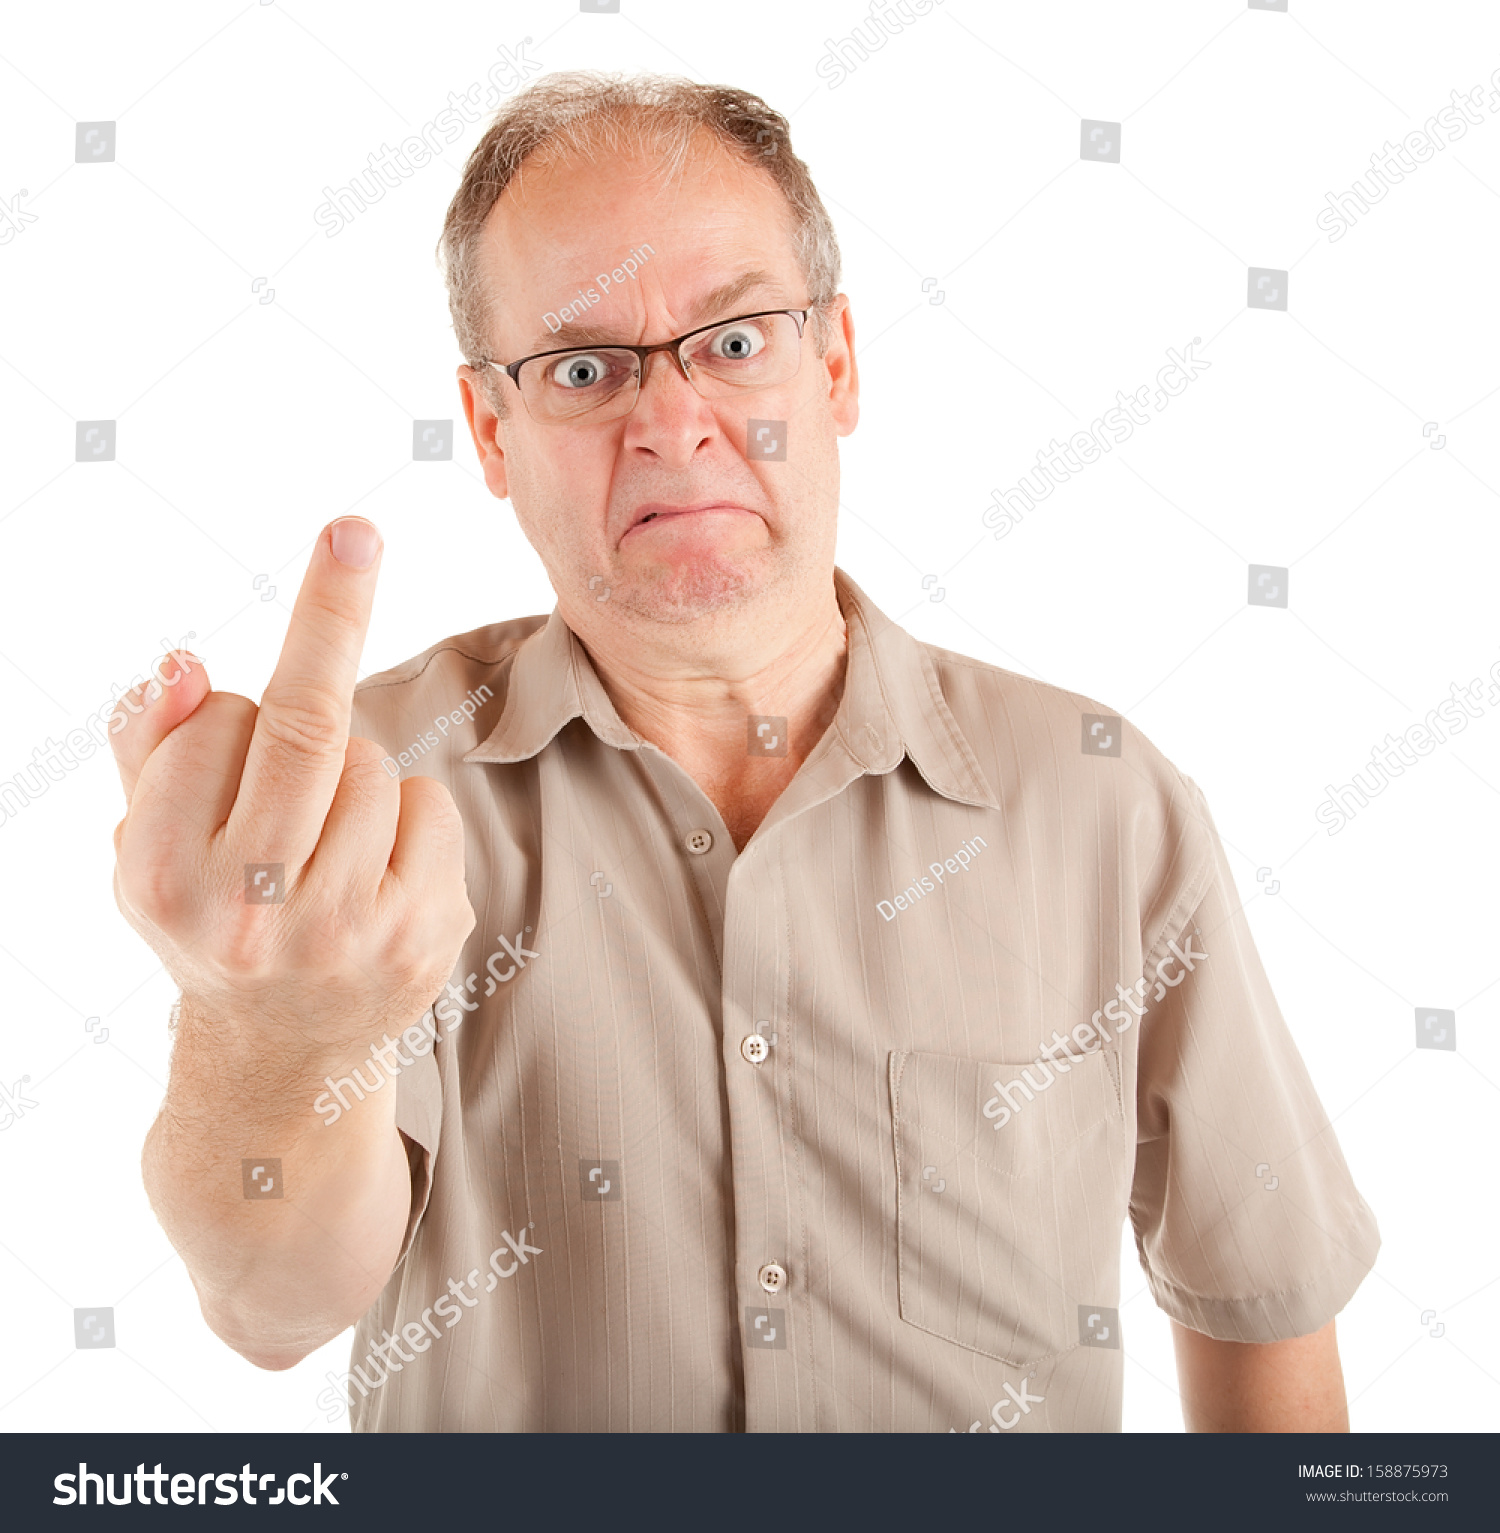 stock-photo-grumpy-man-giving-the-middle-finger-158875973.jpg